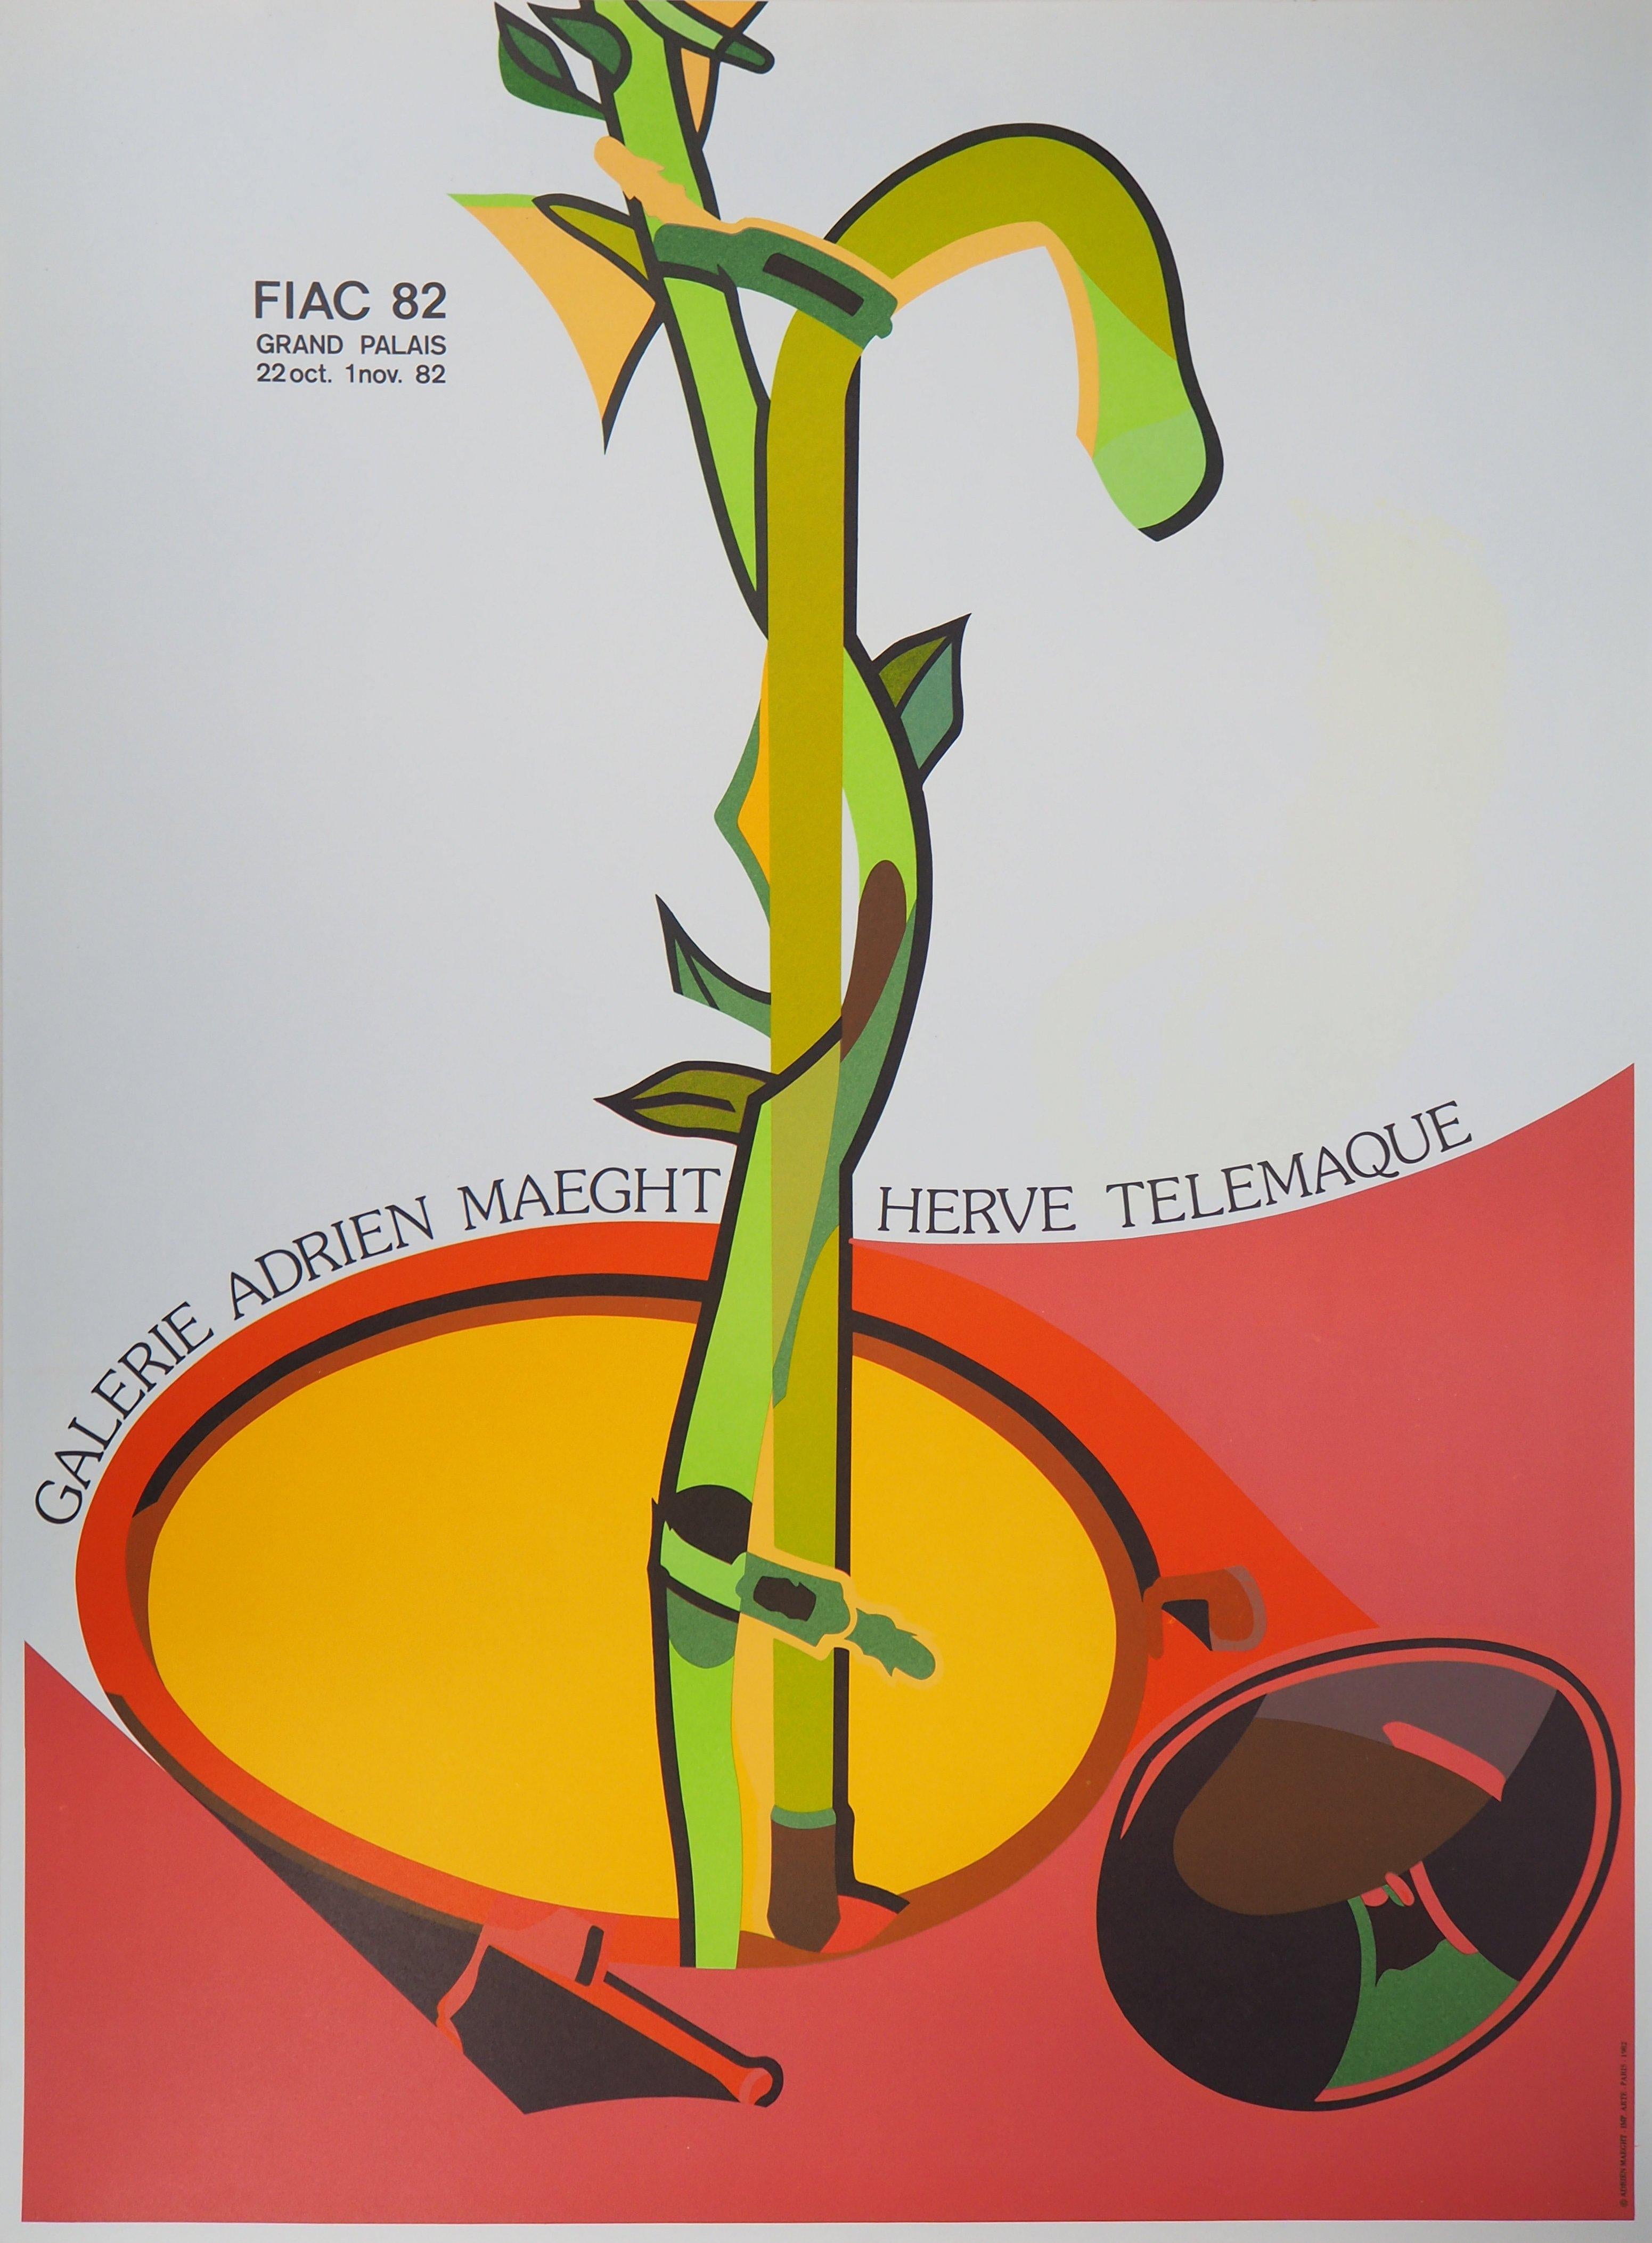 Herve Telemaque Abstract Print - (Ecology) Germination, FIAC - Original vintage lithograph poster - Maeght 1982